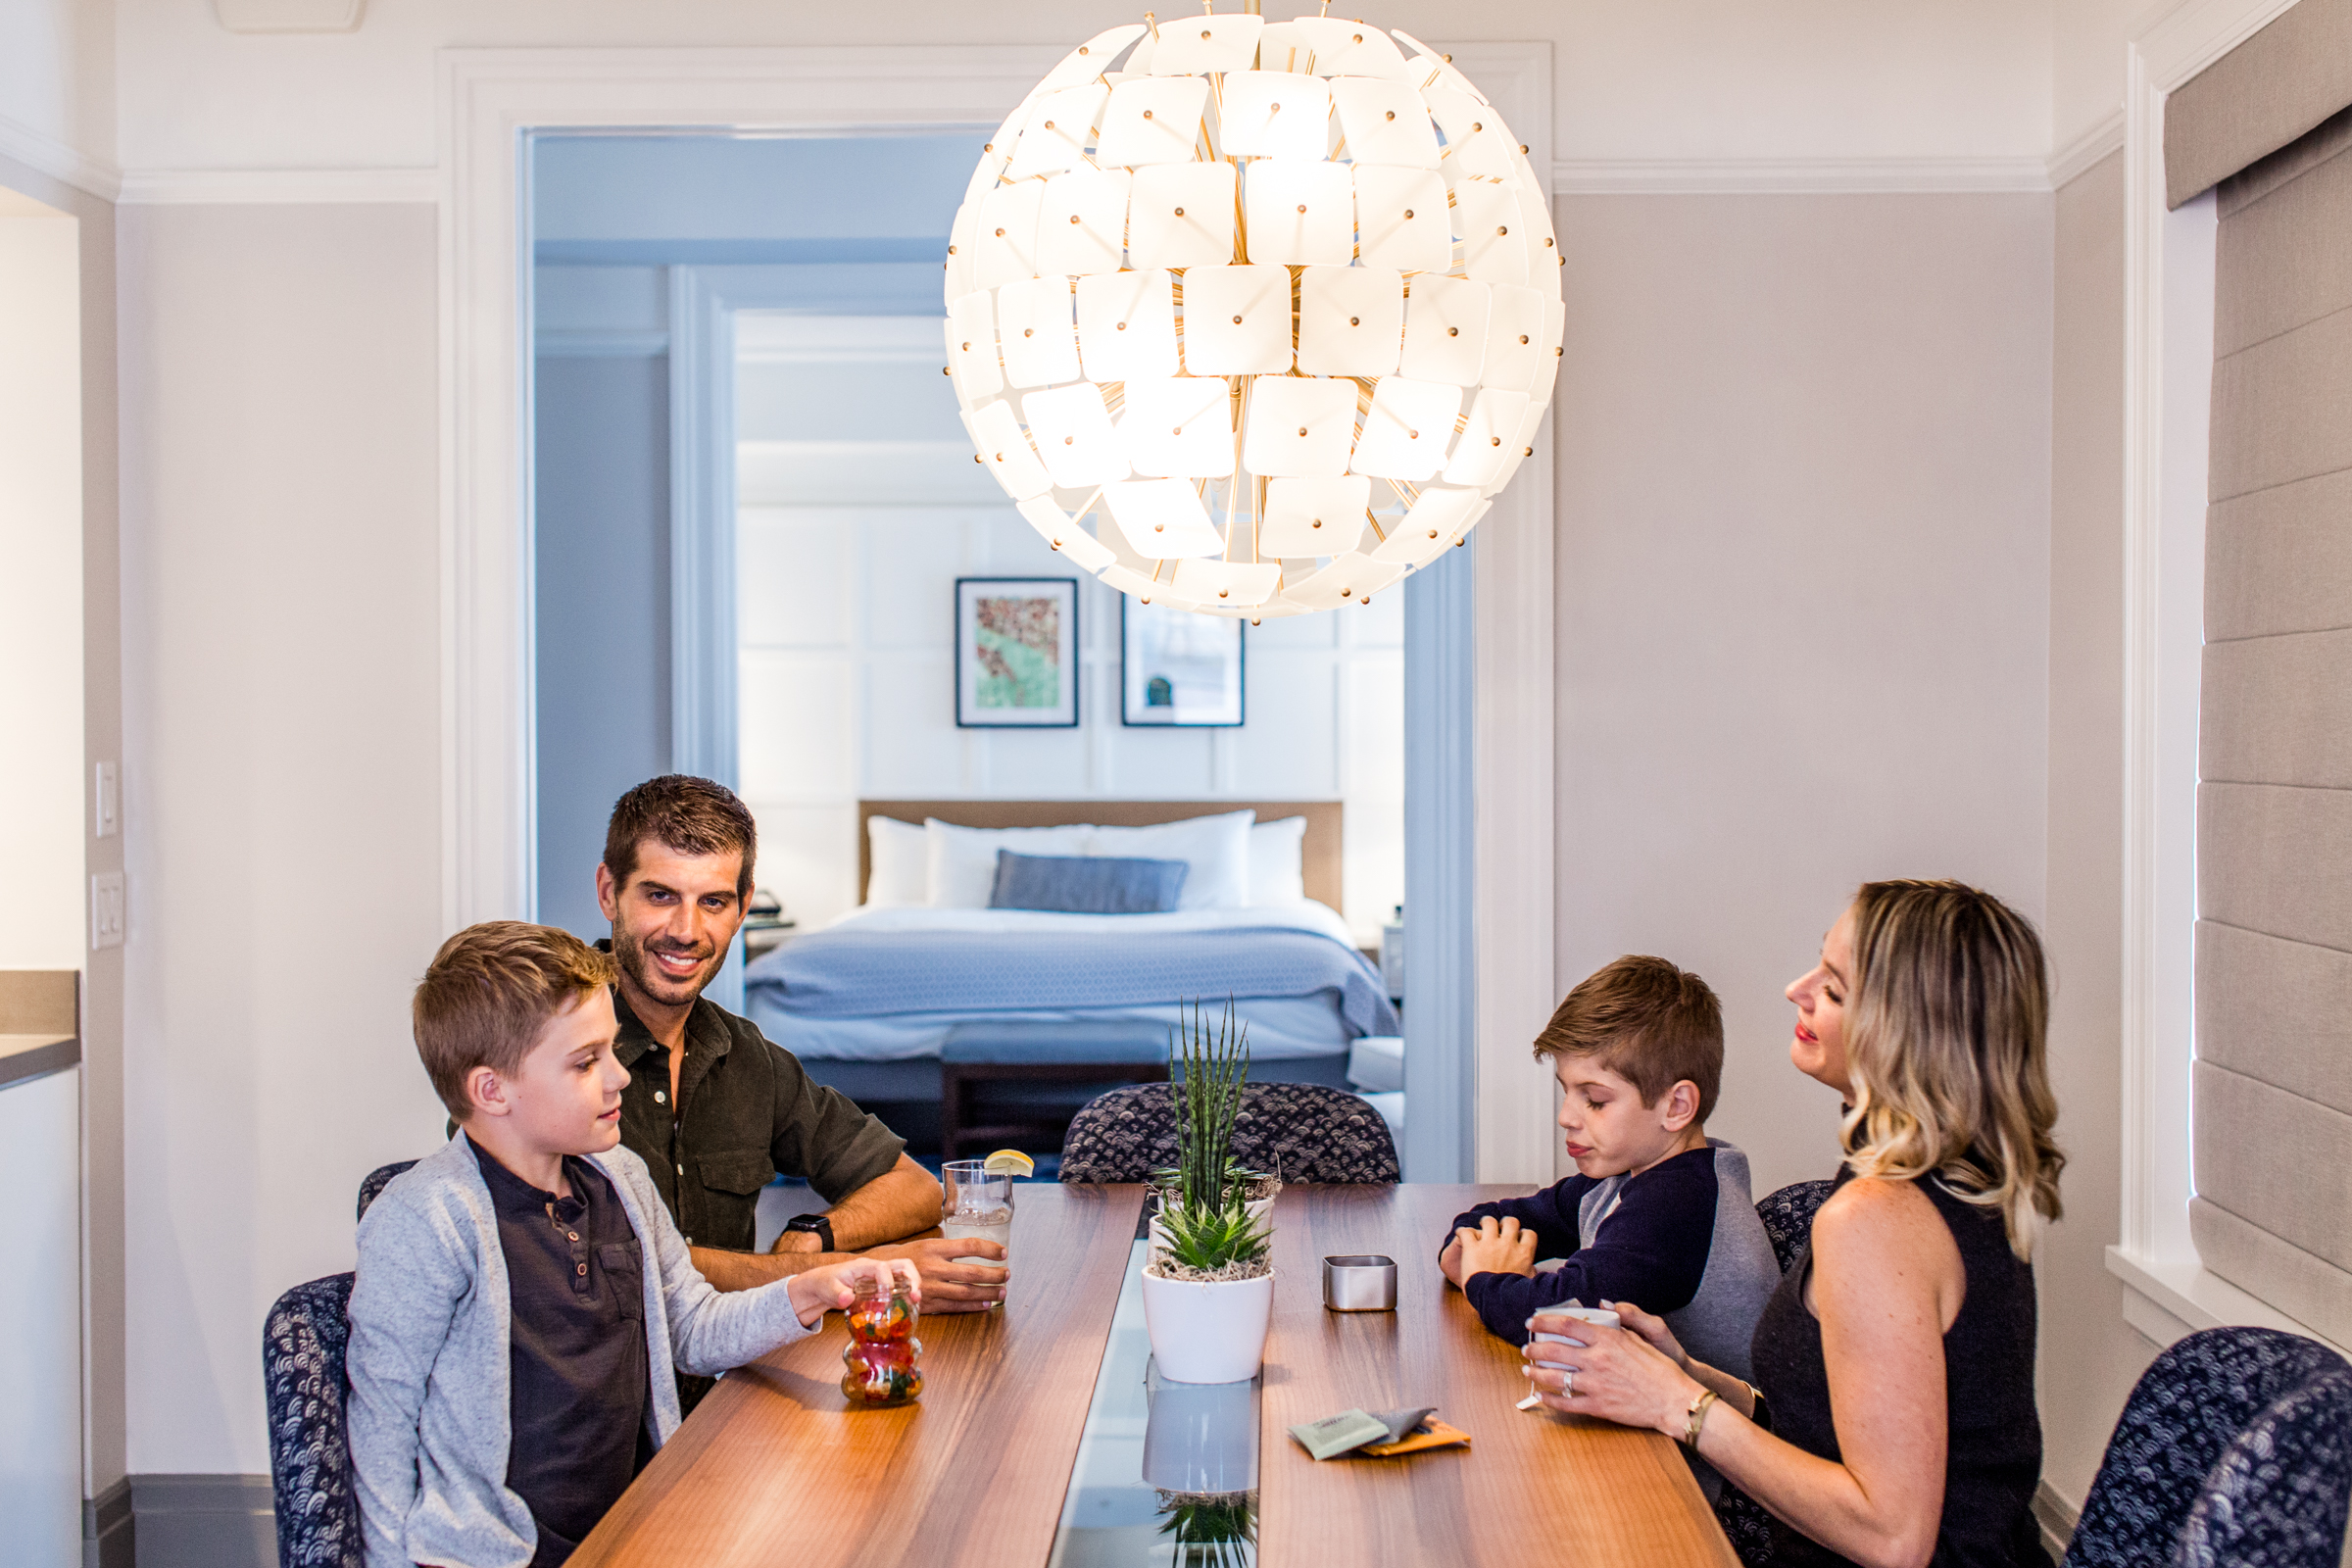 A family sitting in the dining area of the Heathman Hotel's penthouse suite.